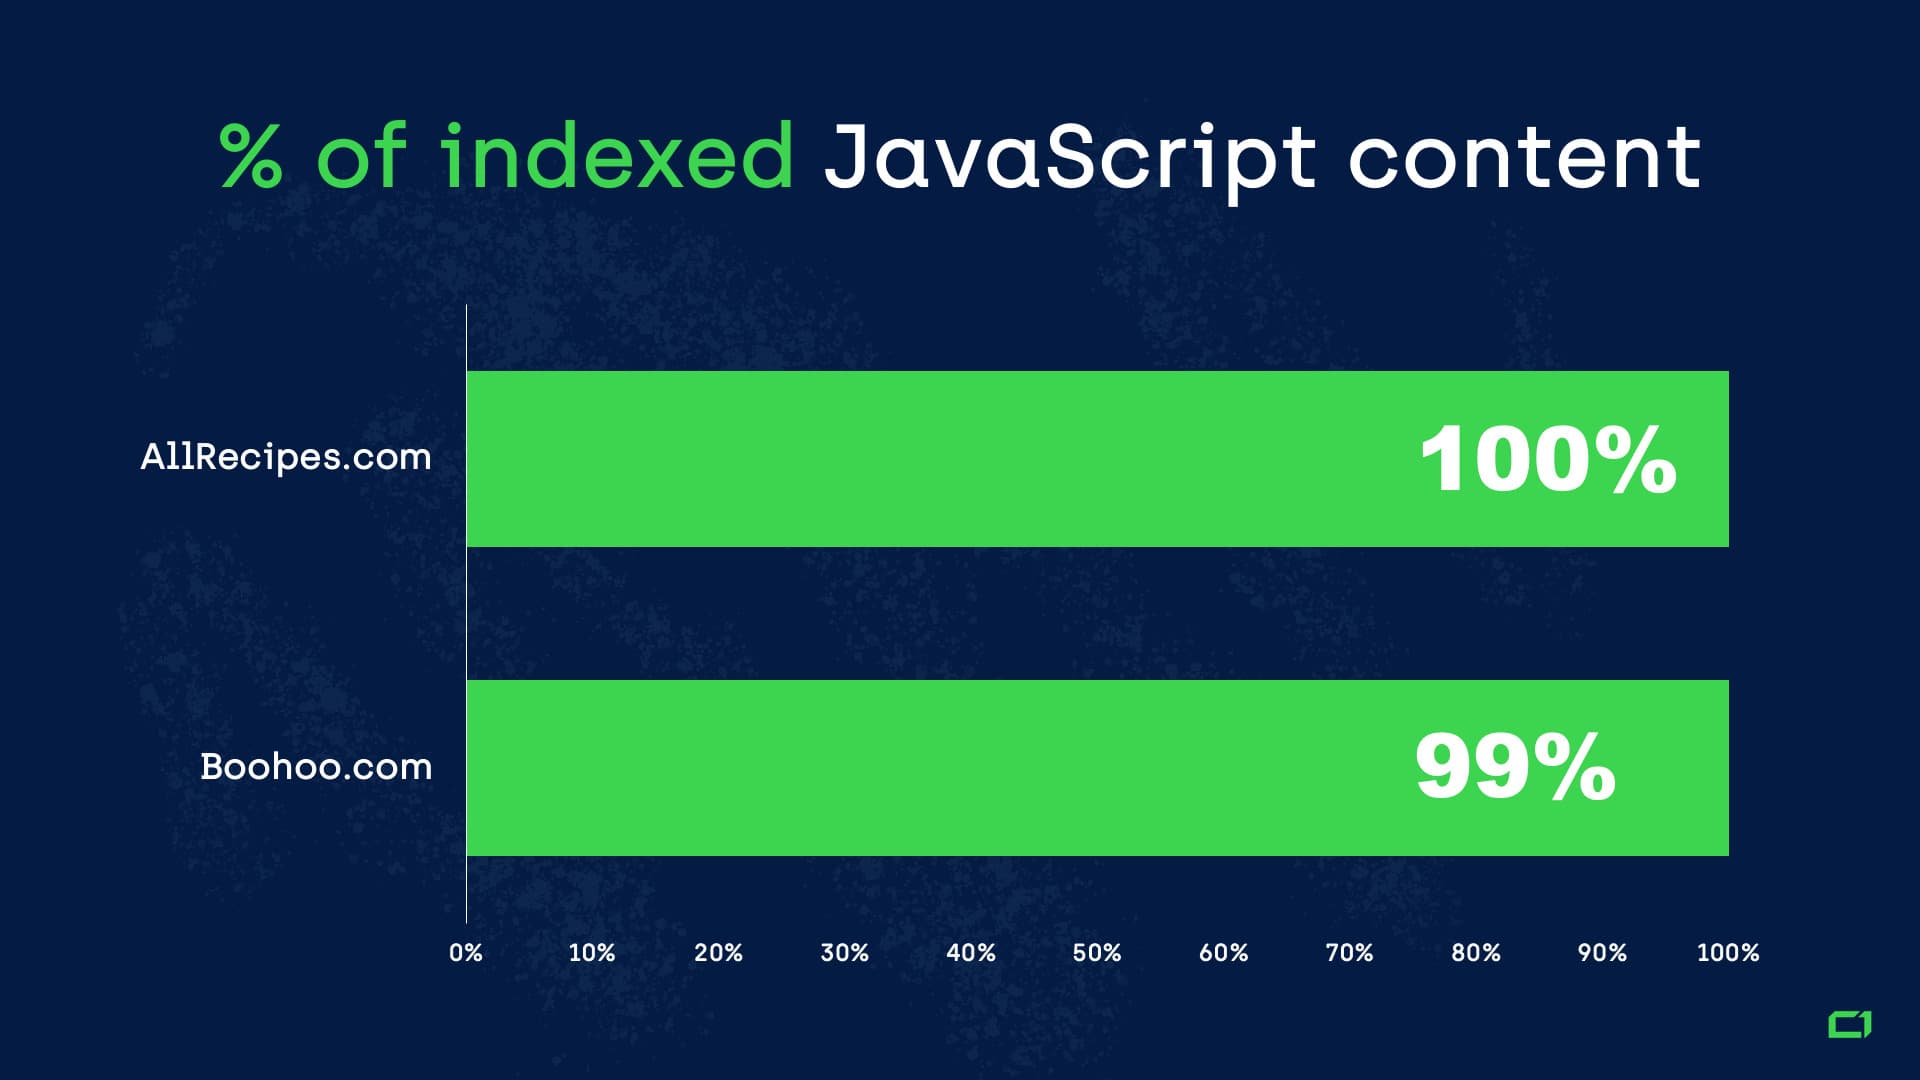 % of indexed JavaScript content for websites allrecipes and boohoo.